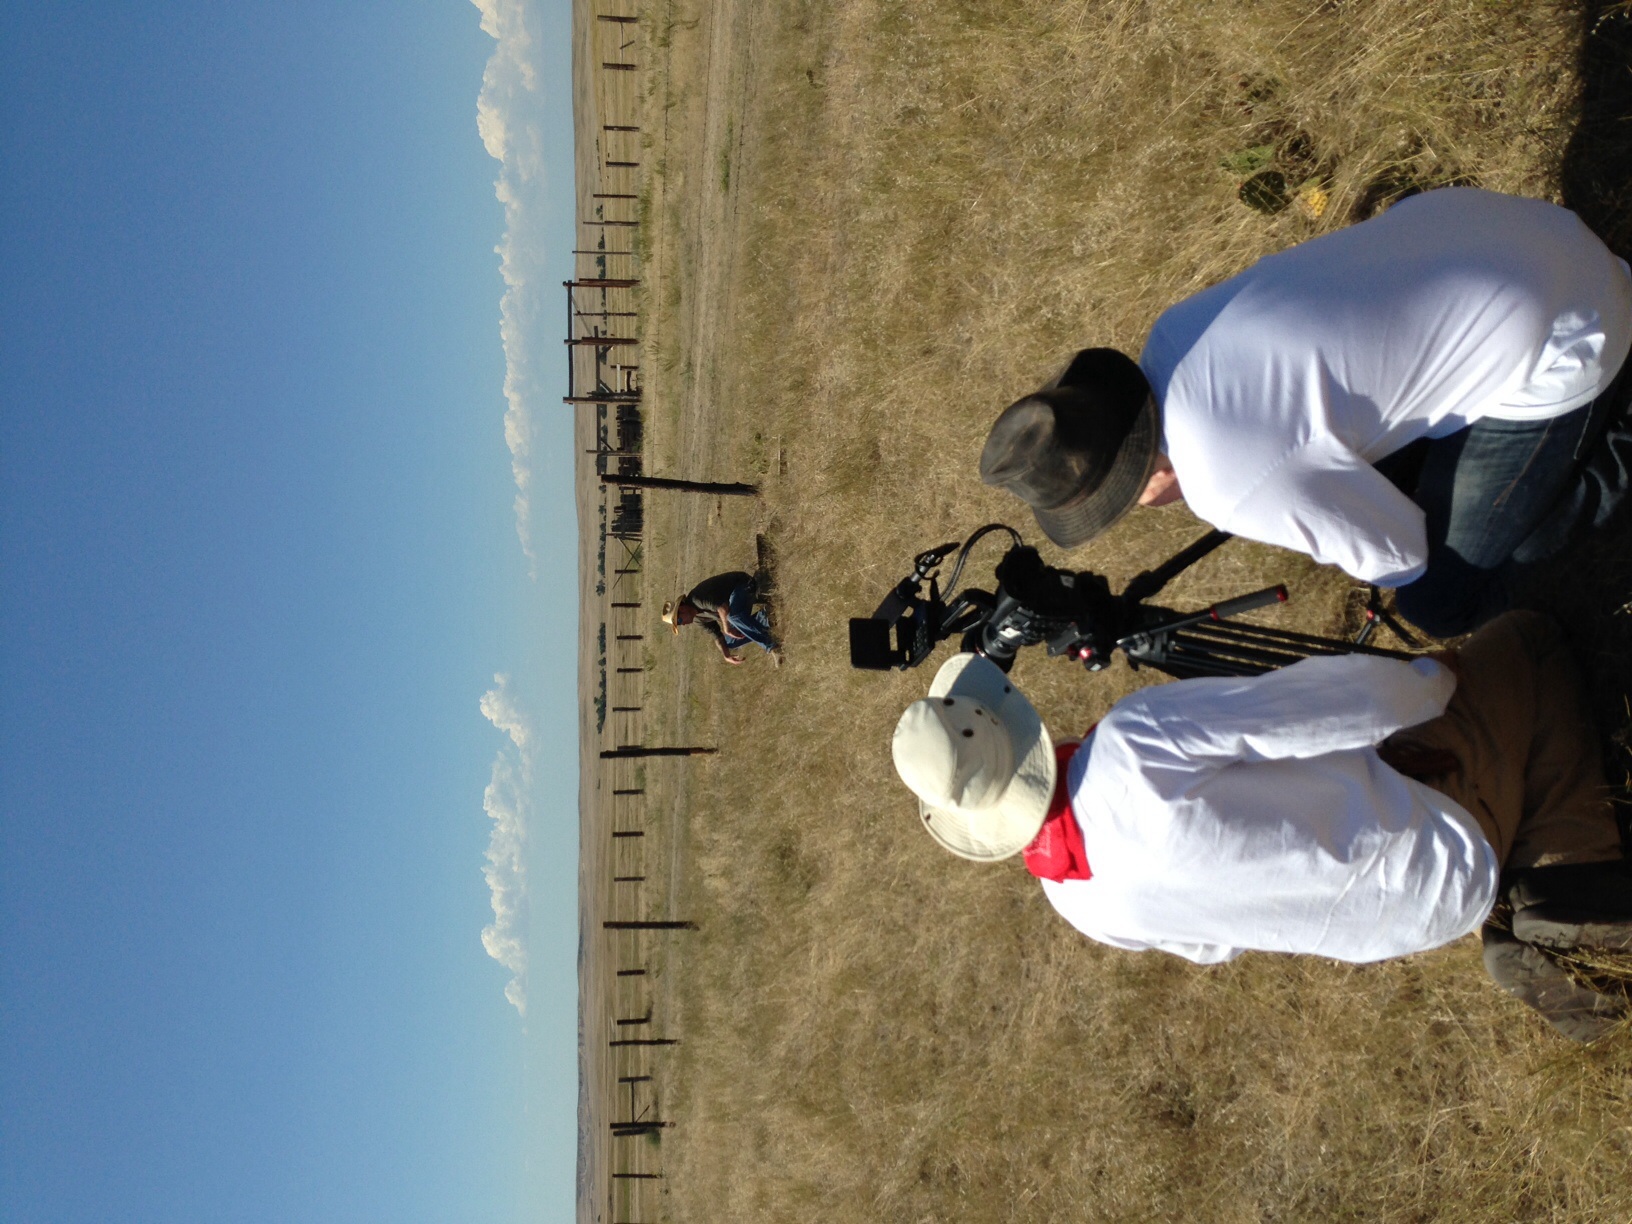 Filming Thank You for Your Service on the Pine Ridge Reservation in South Dakota (August 2013)